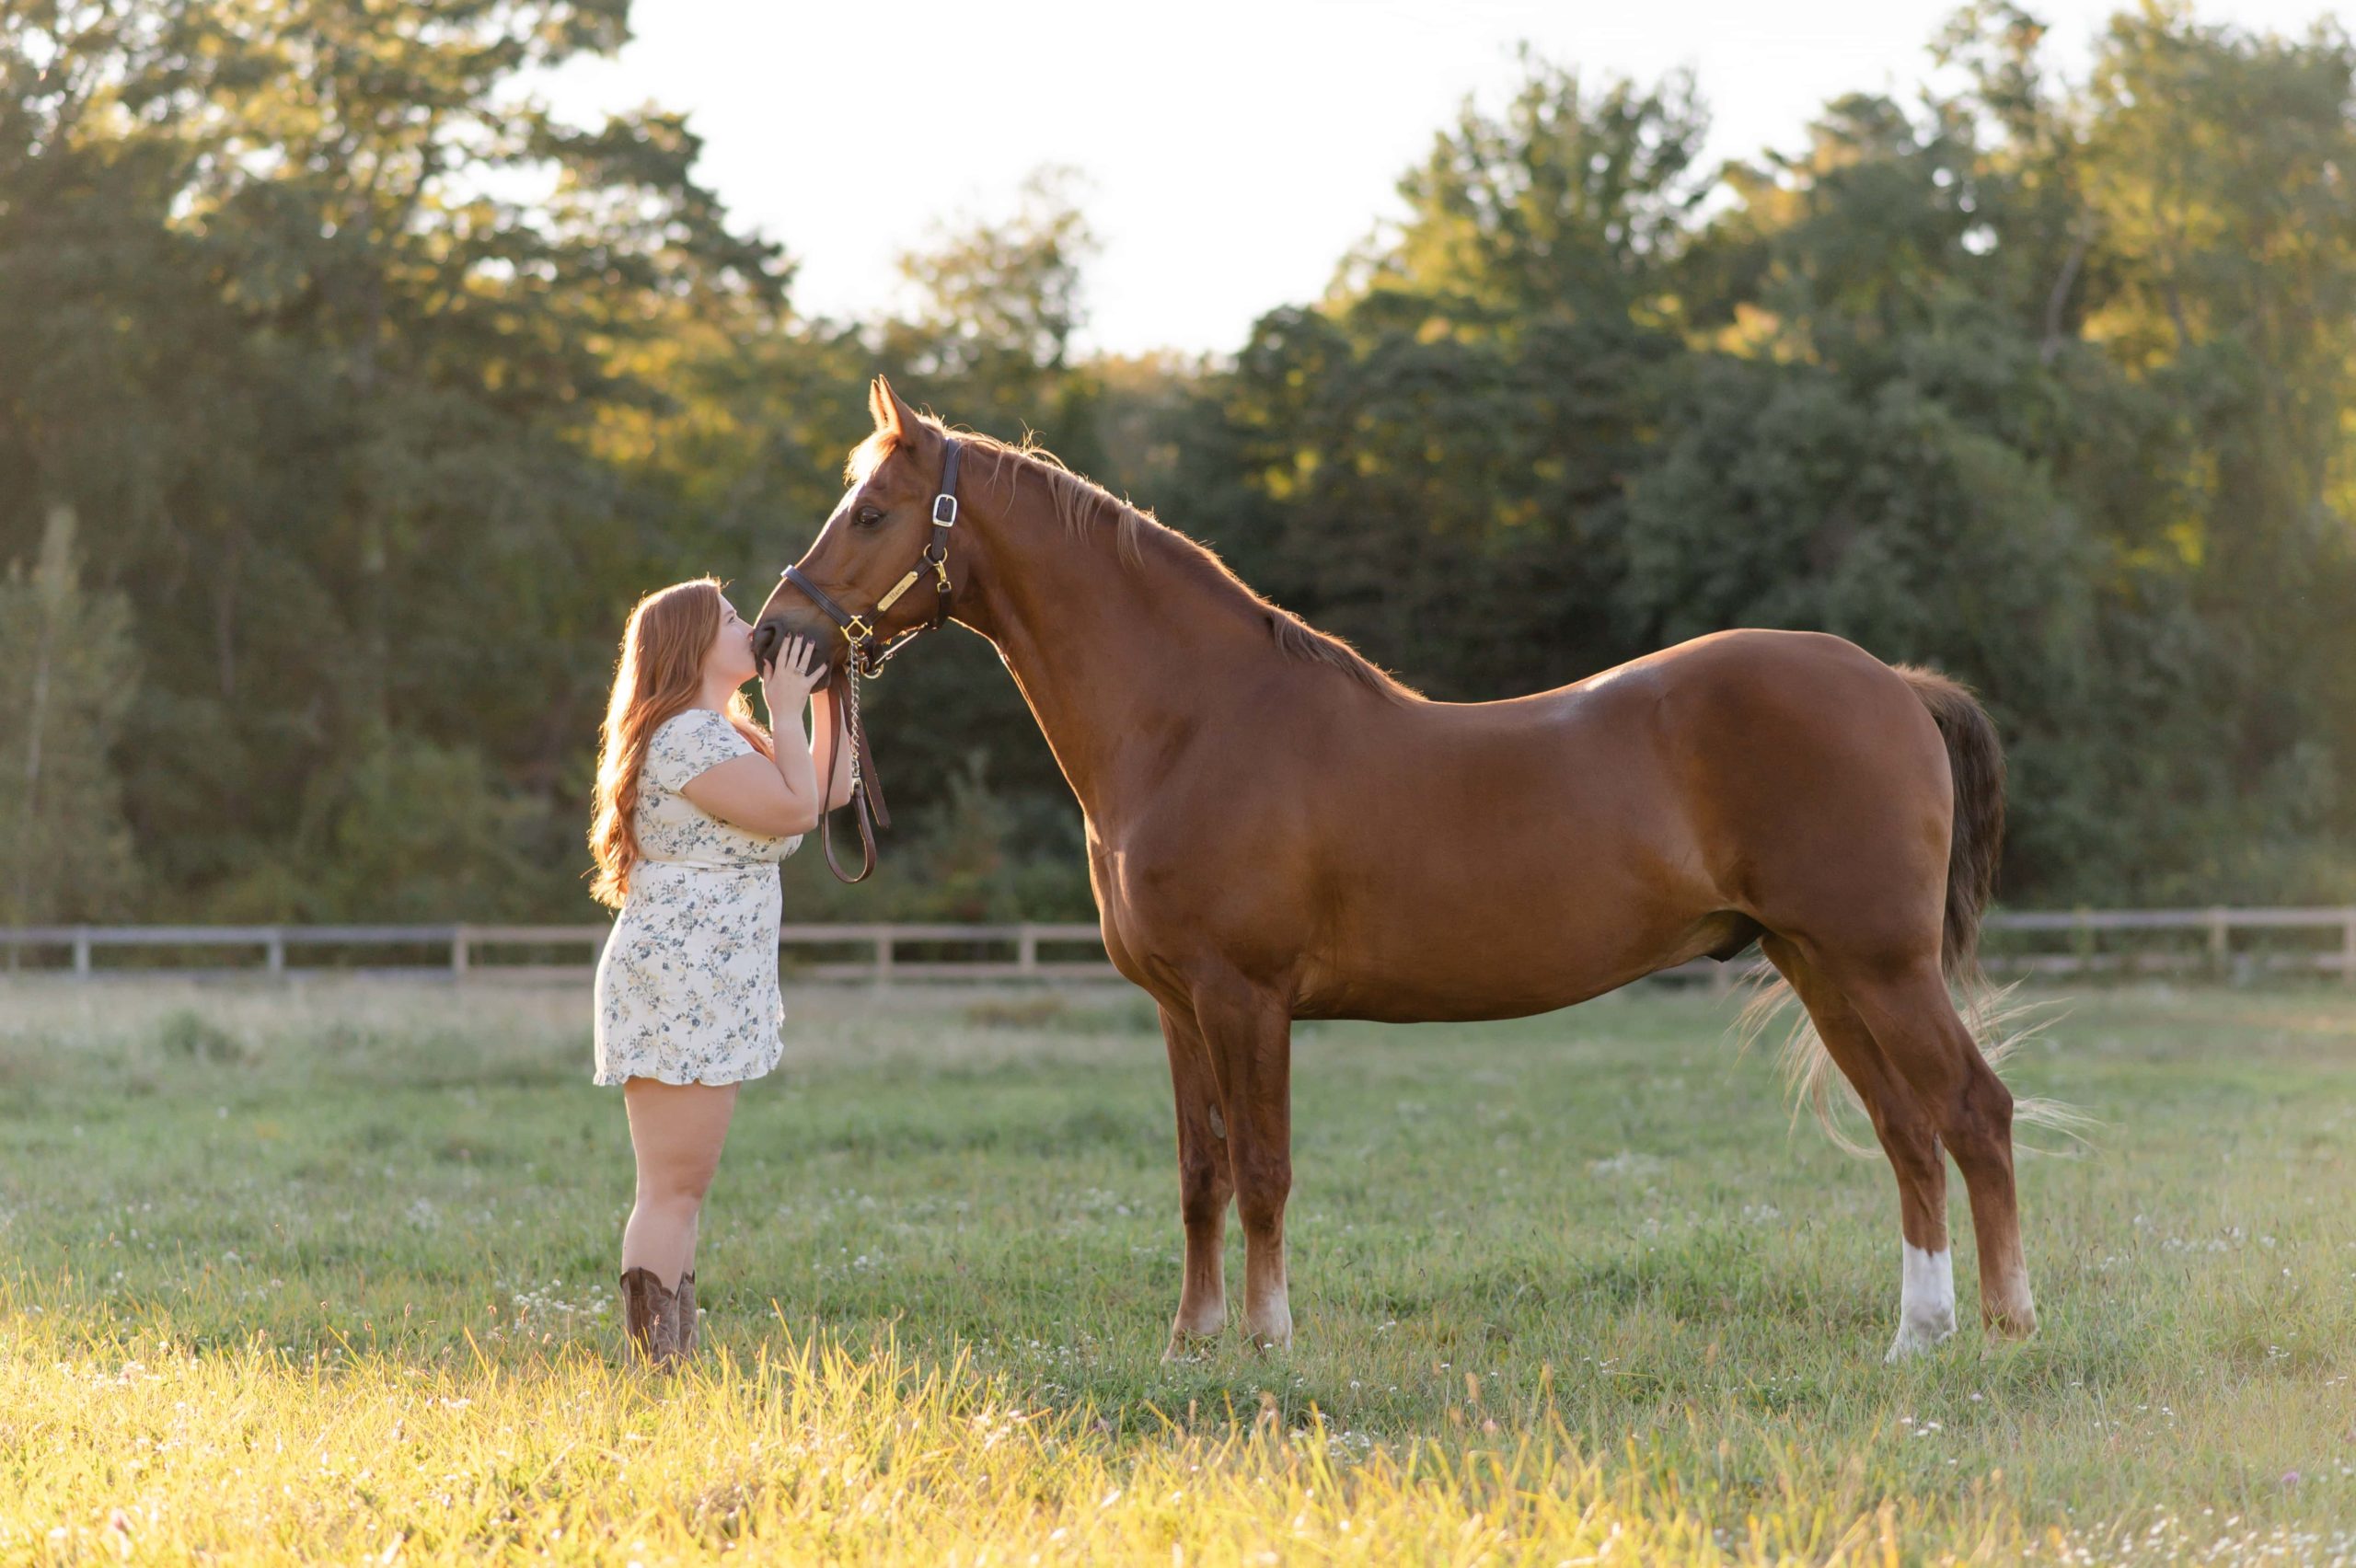 Equestrian photography with a horse rider kissing her horse